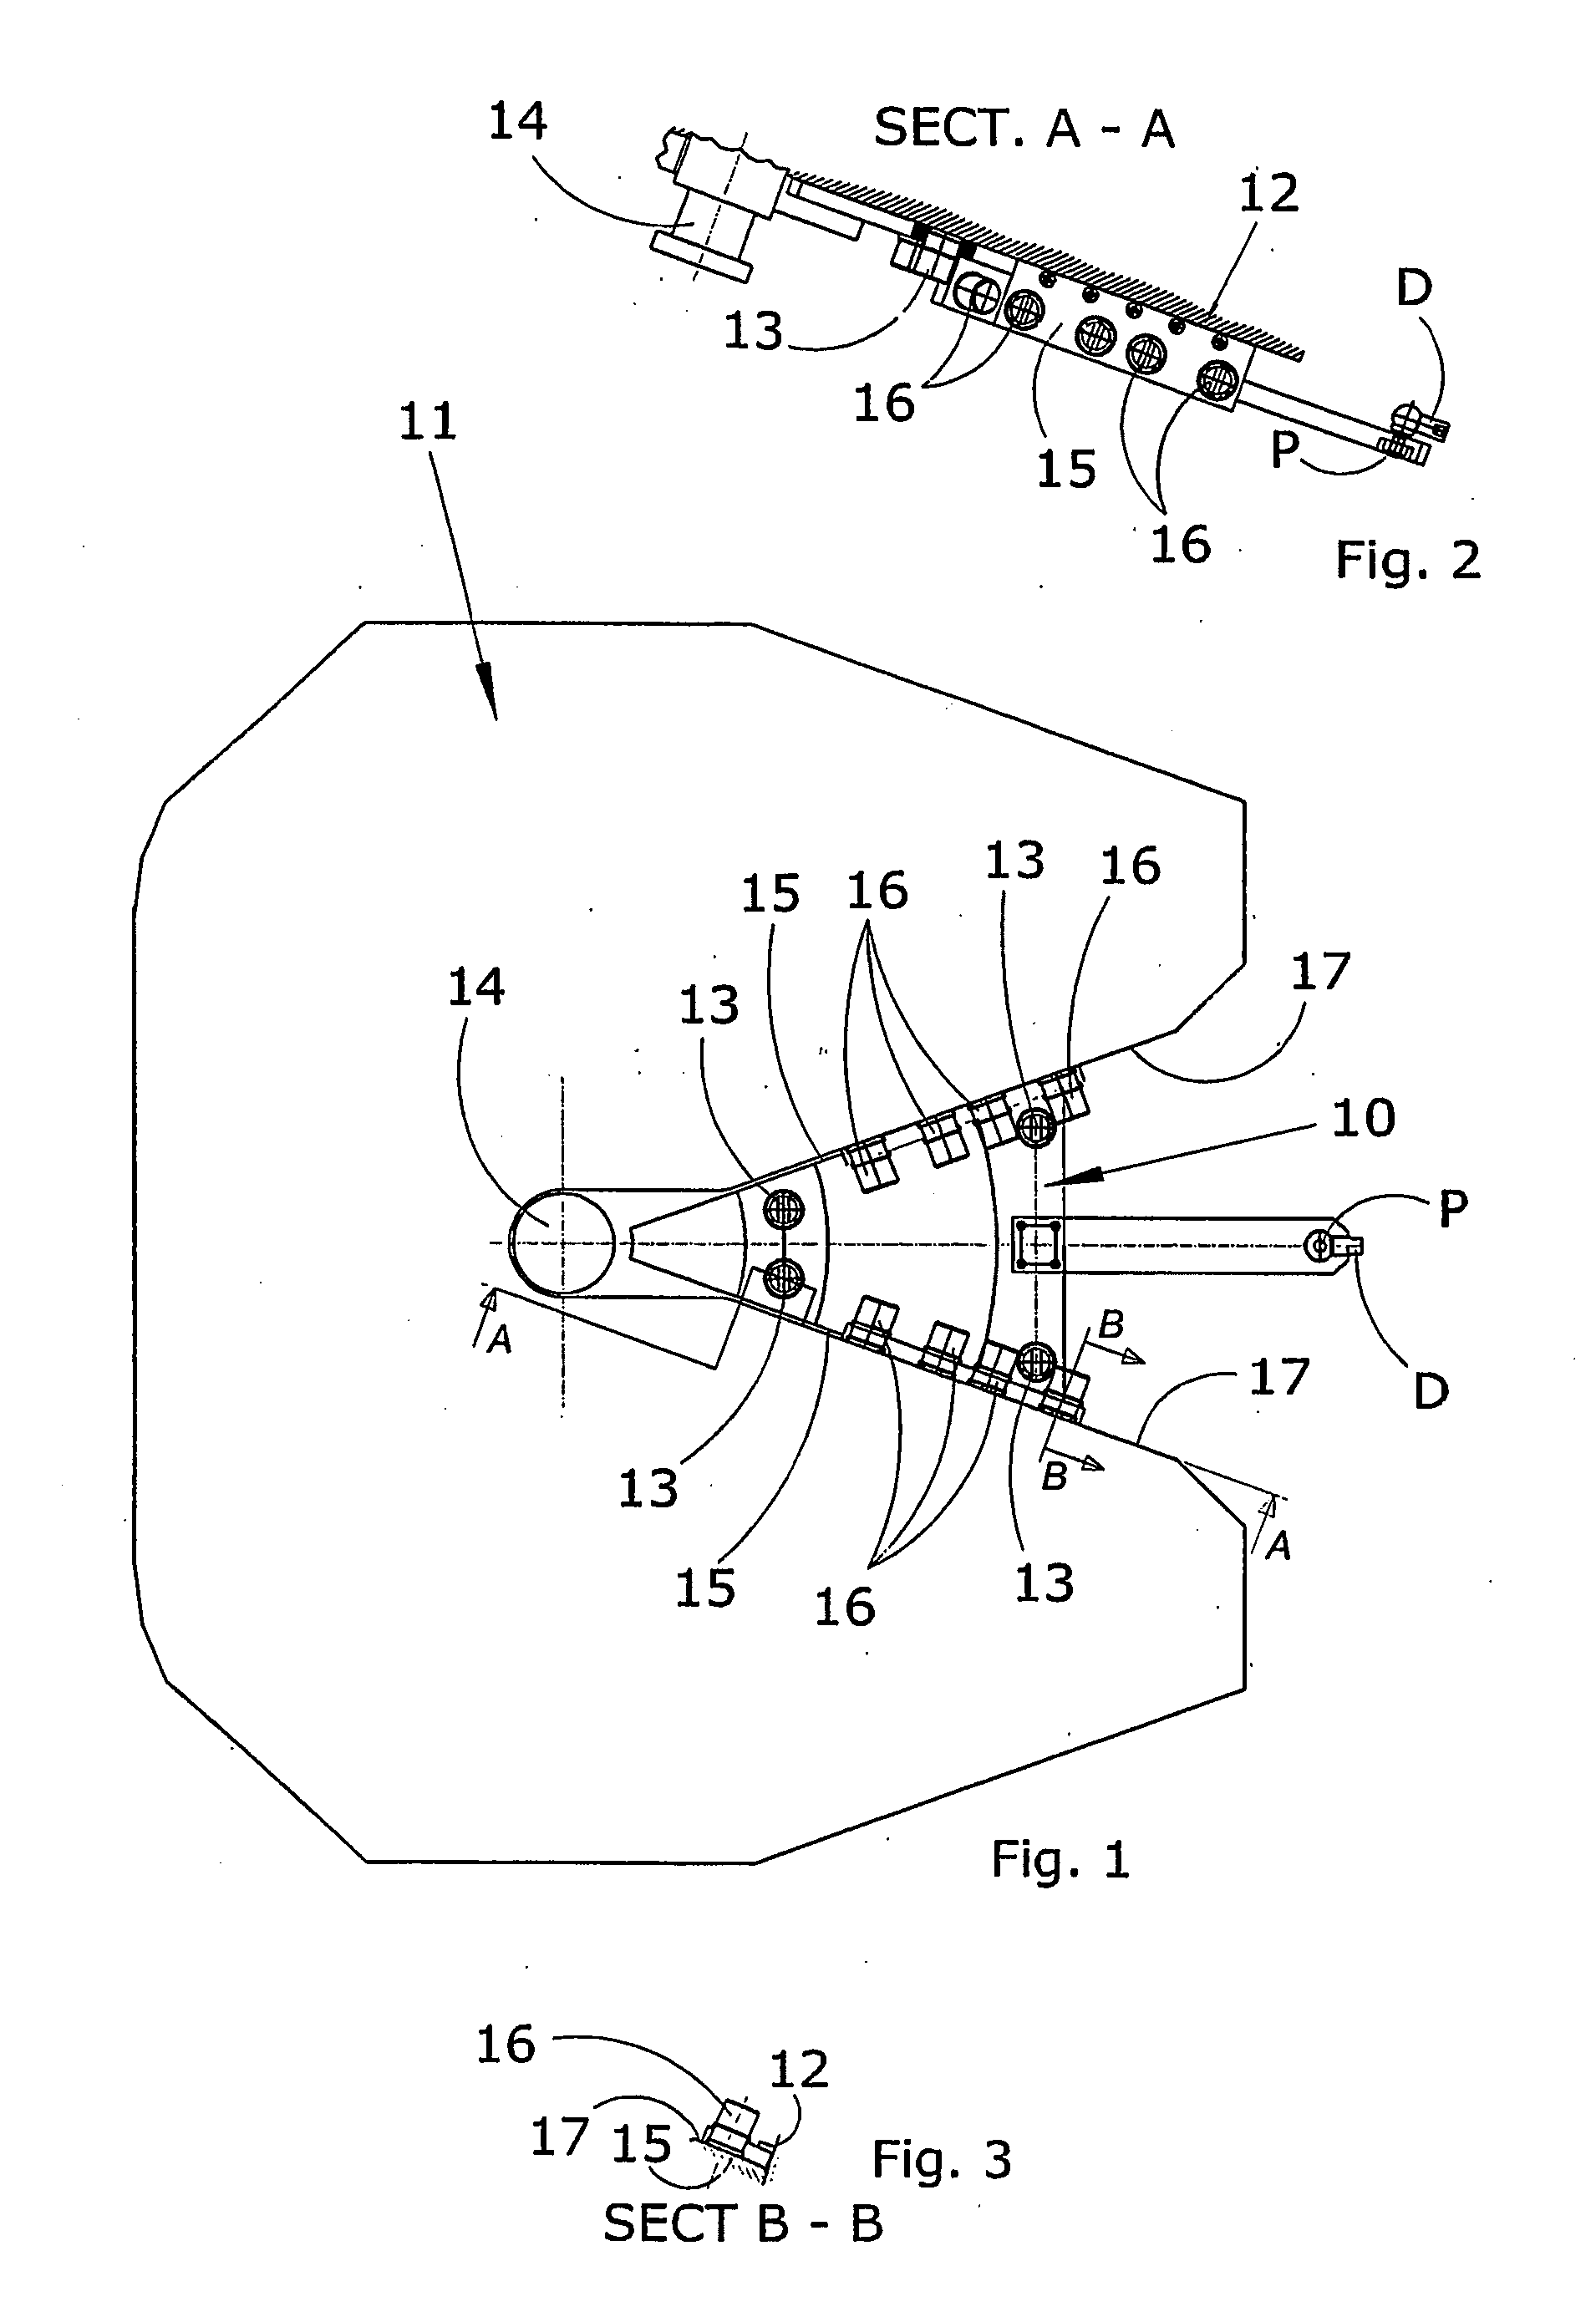 Magnetic wedge device applied to the fifth wheel of trailer or semitrailer vehicles